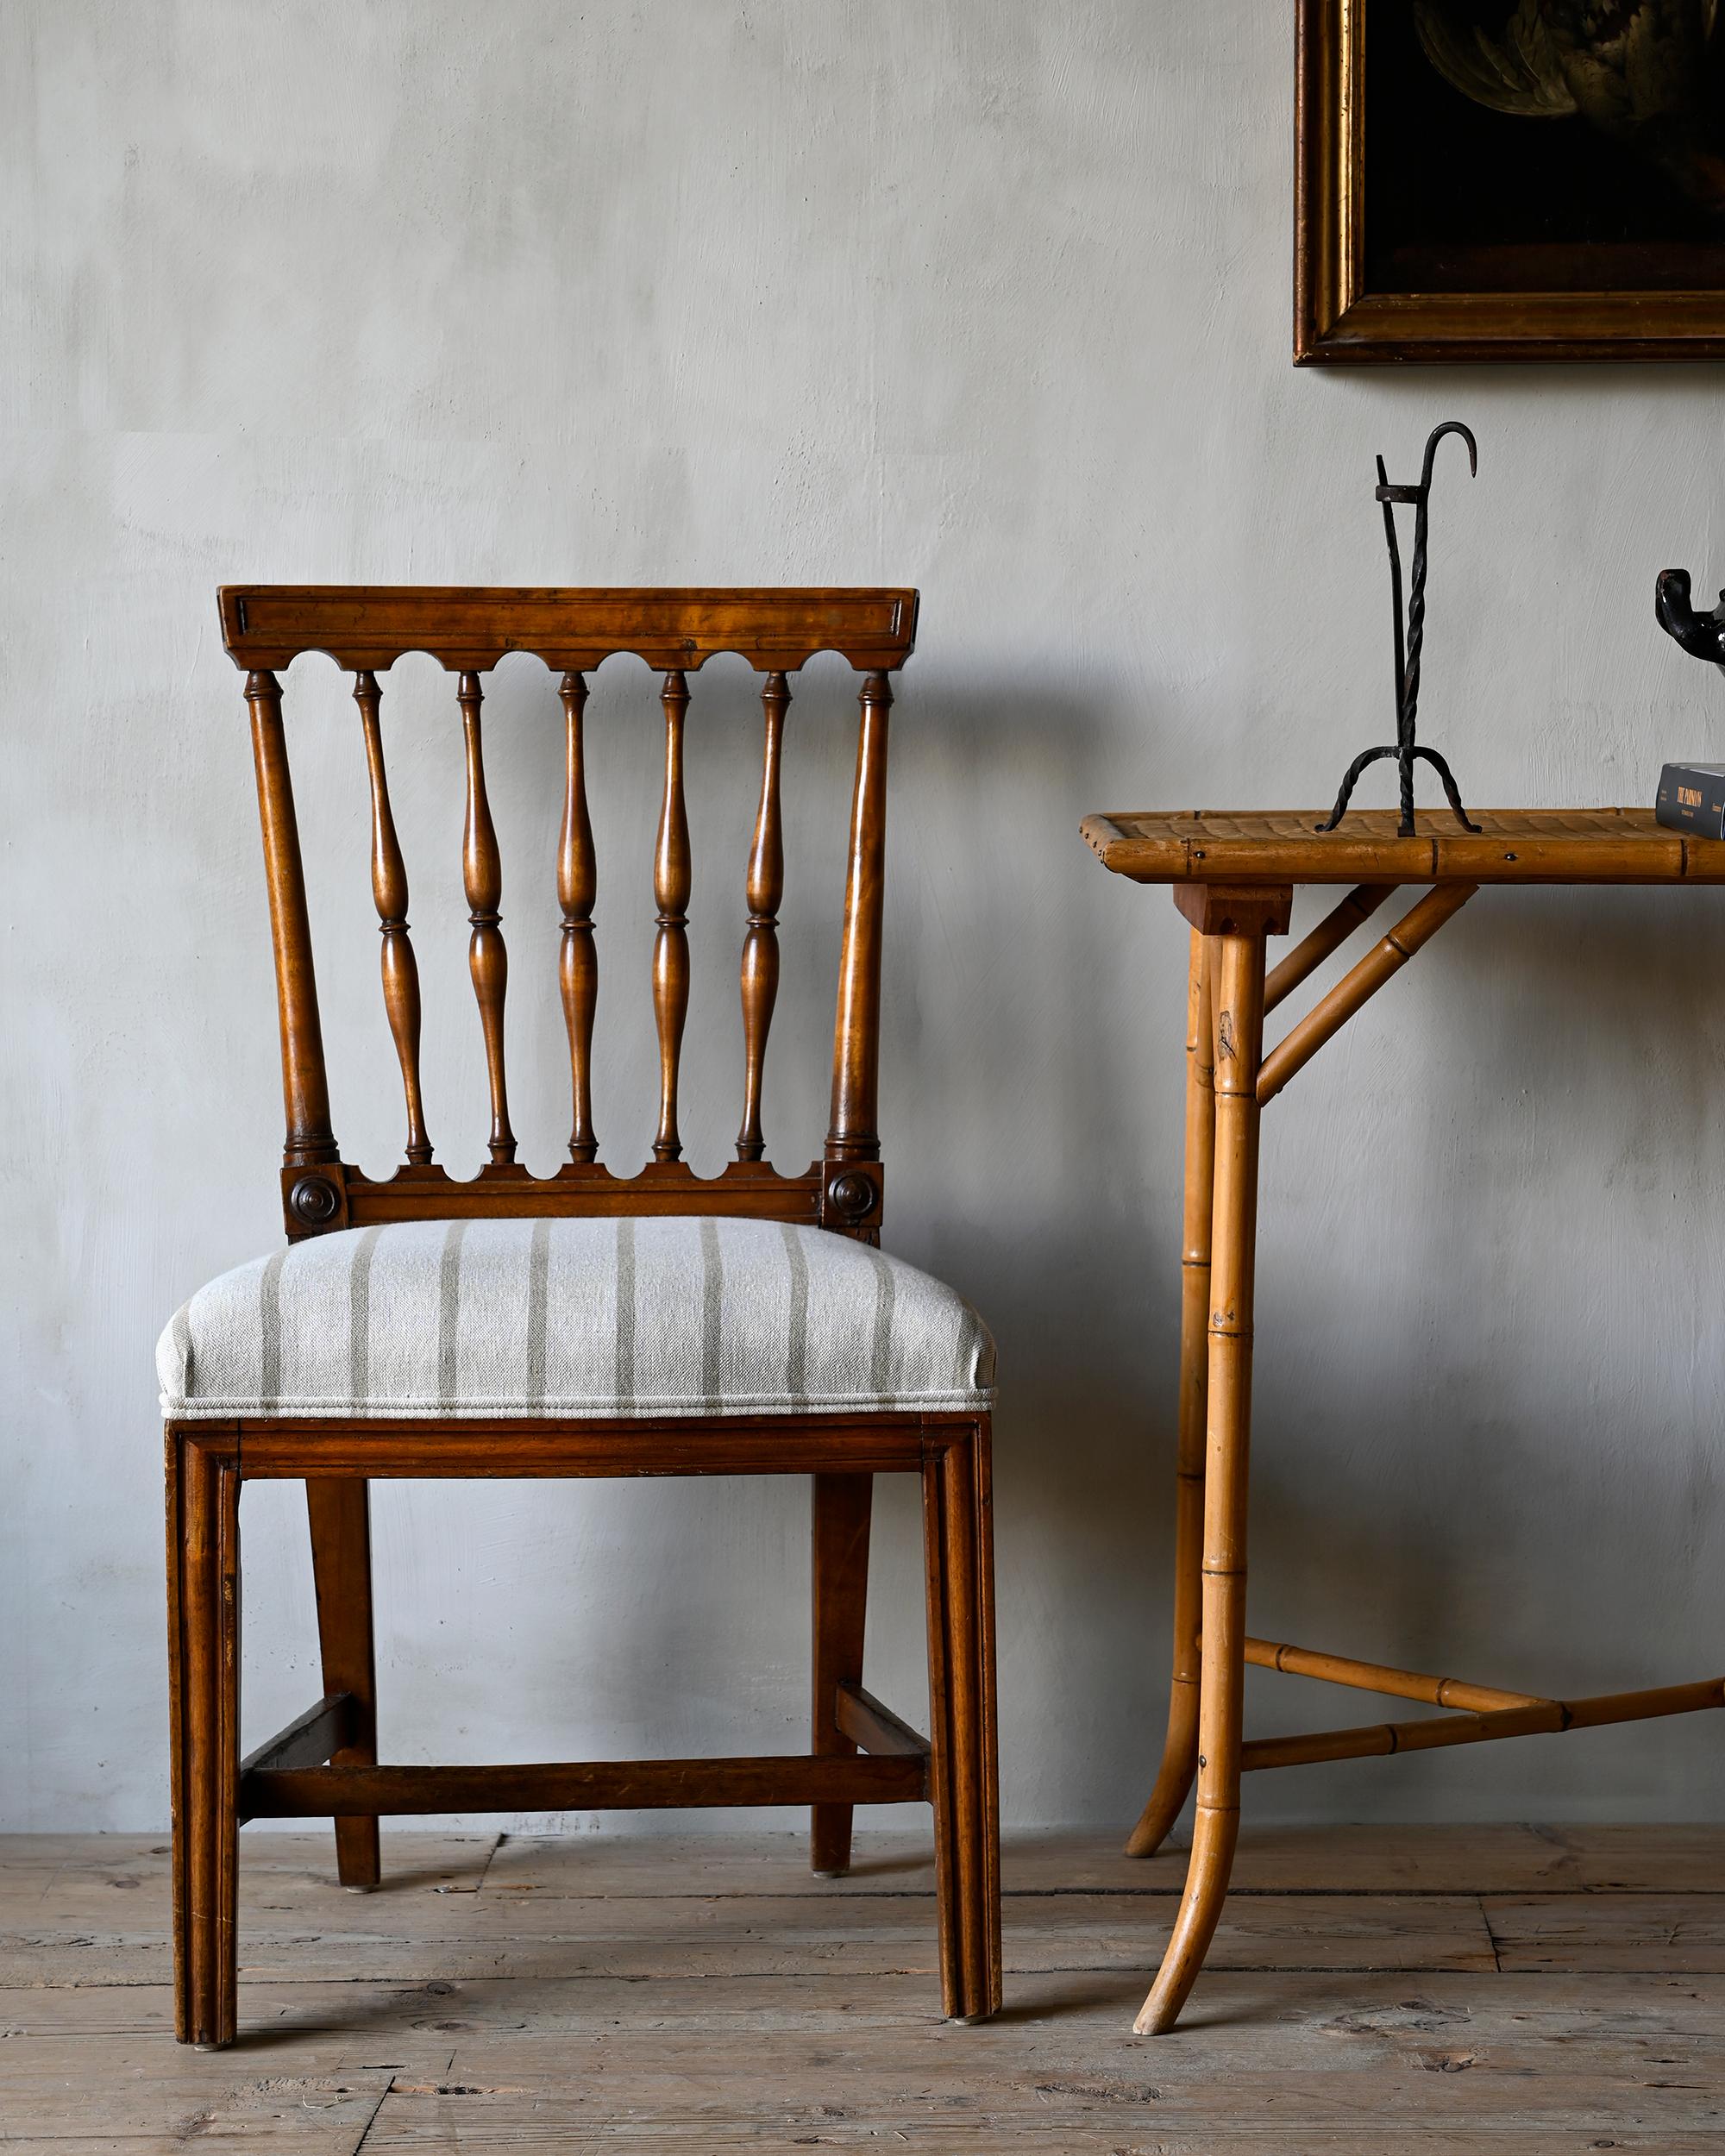 Rare and fine pair of early 19th century Gustavian chairs in Chinese taste signed by master chair maker Ephraim Sthal (1767-1820) Supplier to the Royal Court and one of the most sophisticated and inventive makers of his period. ca 1800 Stockholm,